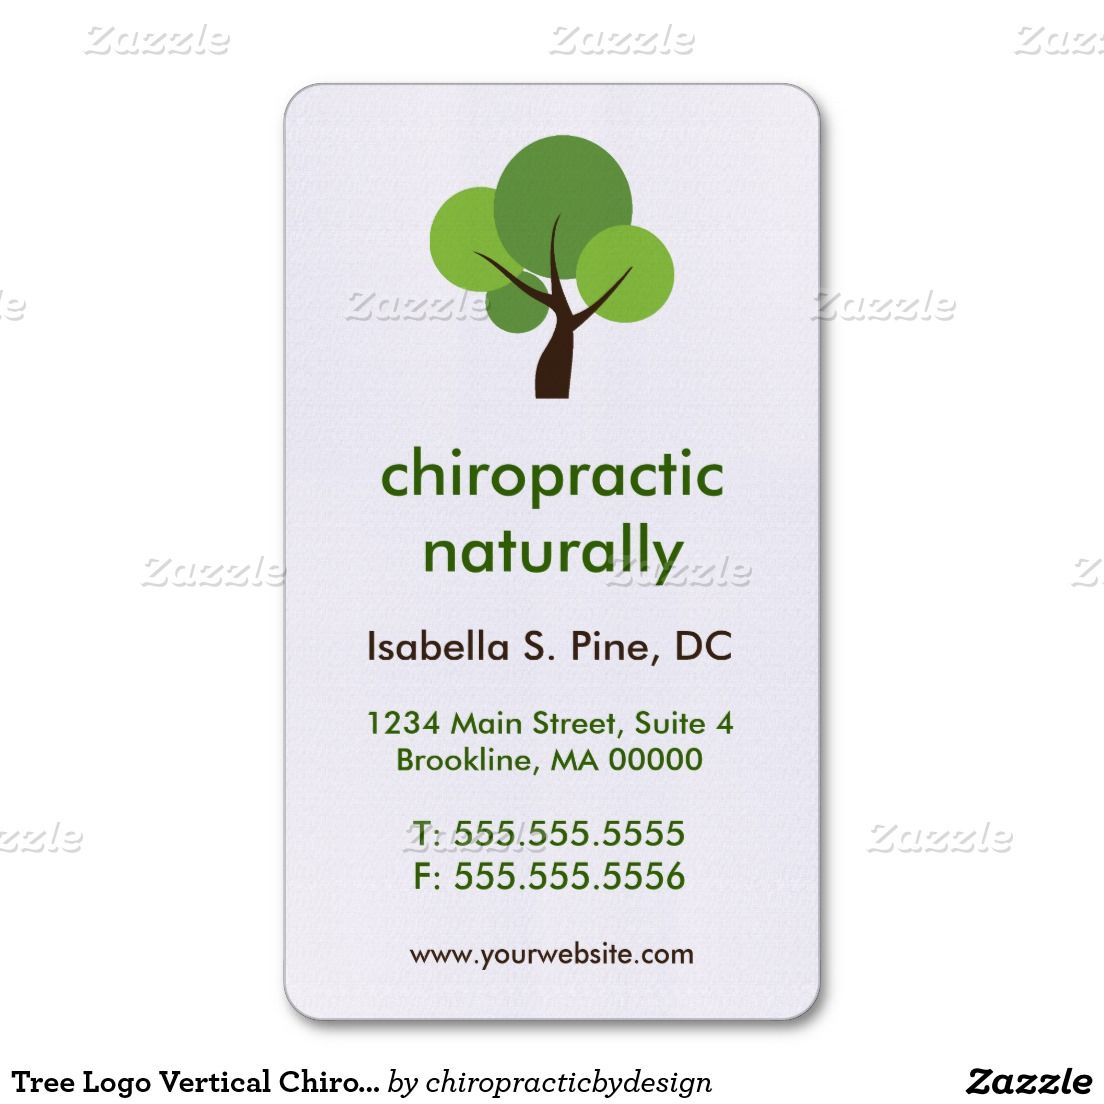 chiropractor business cards 3